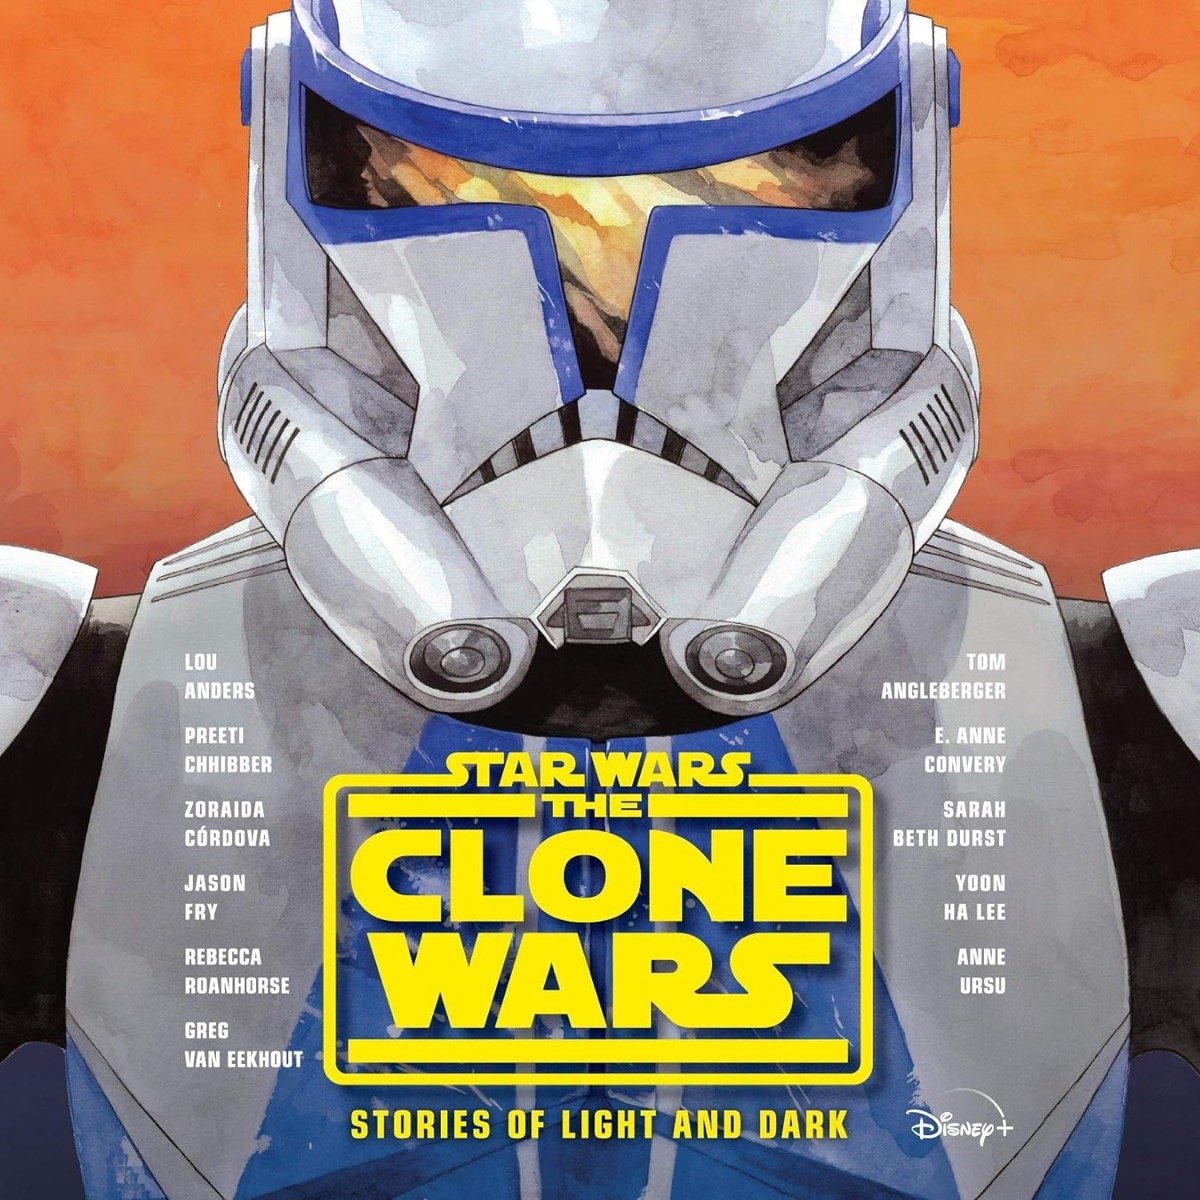 Clone soldiers stands solemn on cover art for "Star Wars The Clone Wars- Stories of Light and Dark"